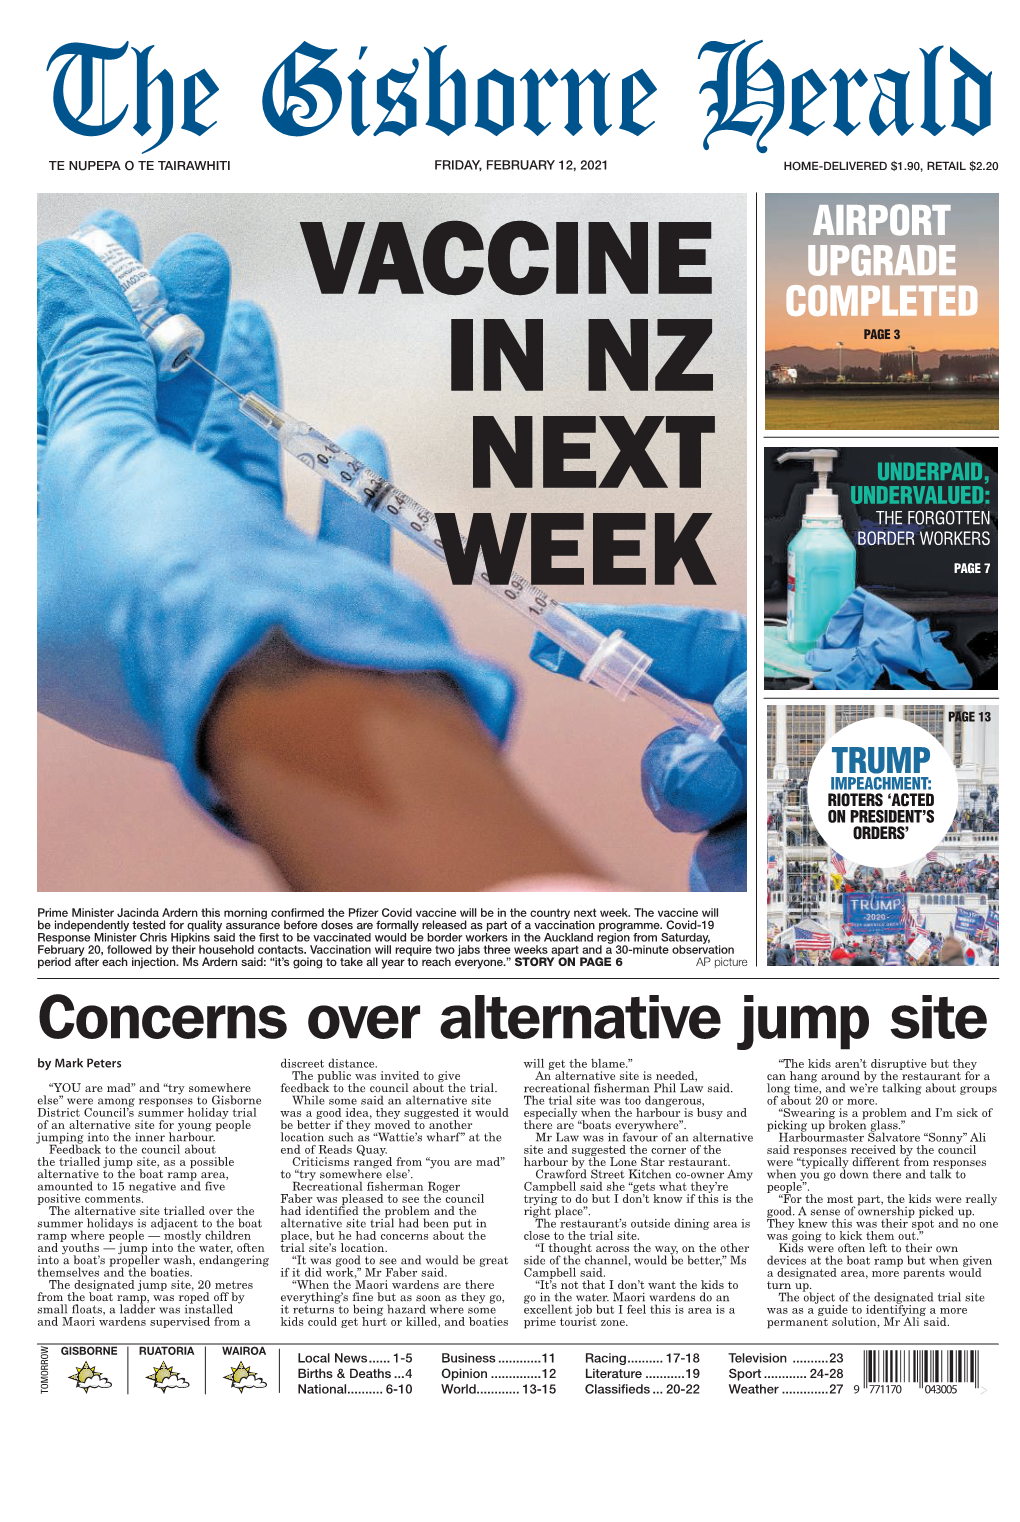 Friday, February 12, 2021 Home-Delivered $1.90, Retail $2.20 Airport Vaccine Upgrade Completed in Nz Page 3